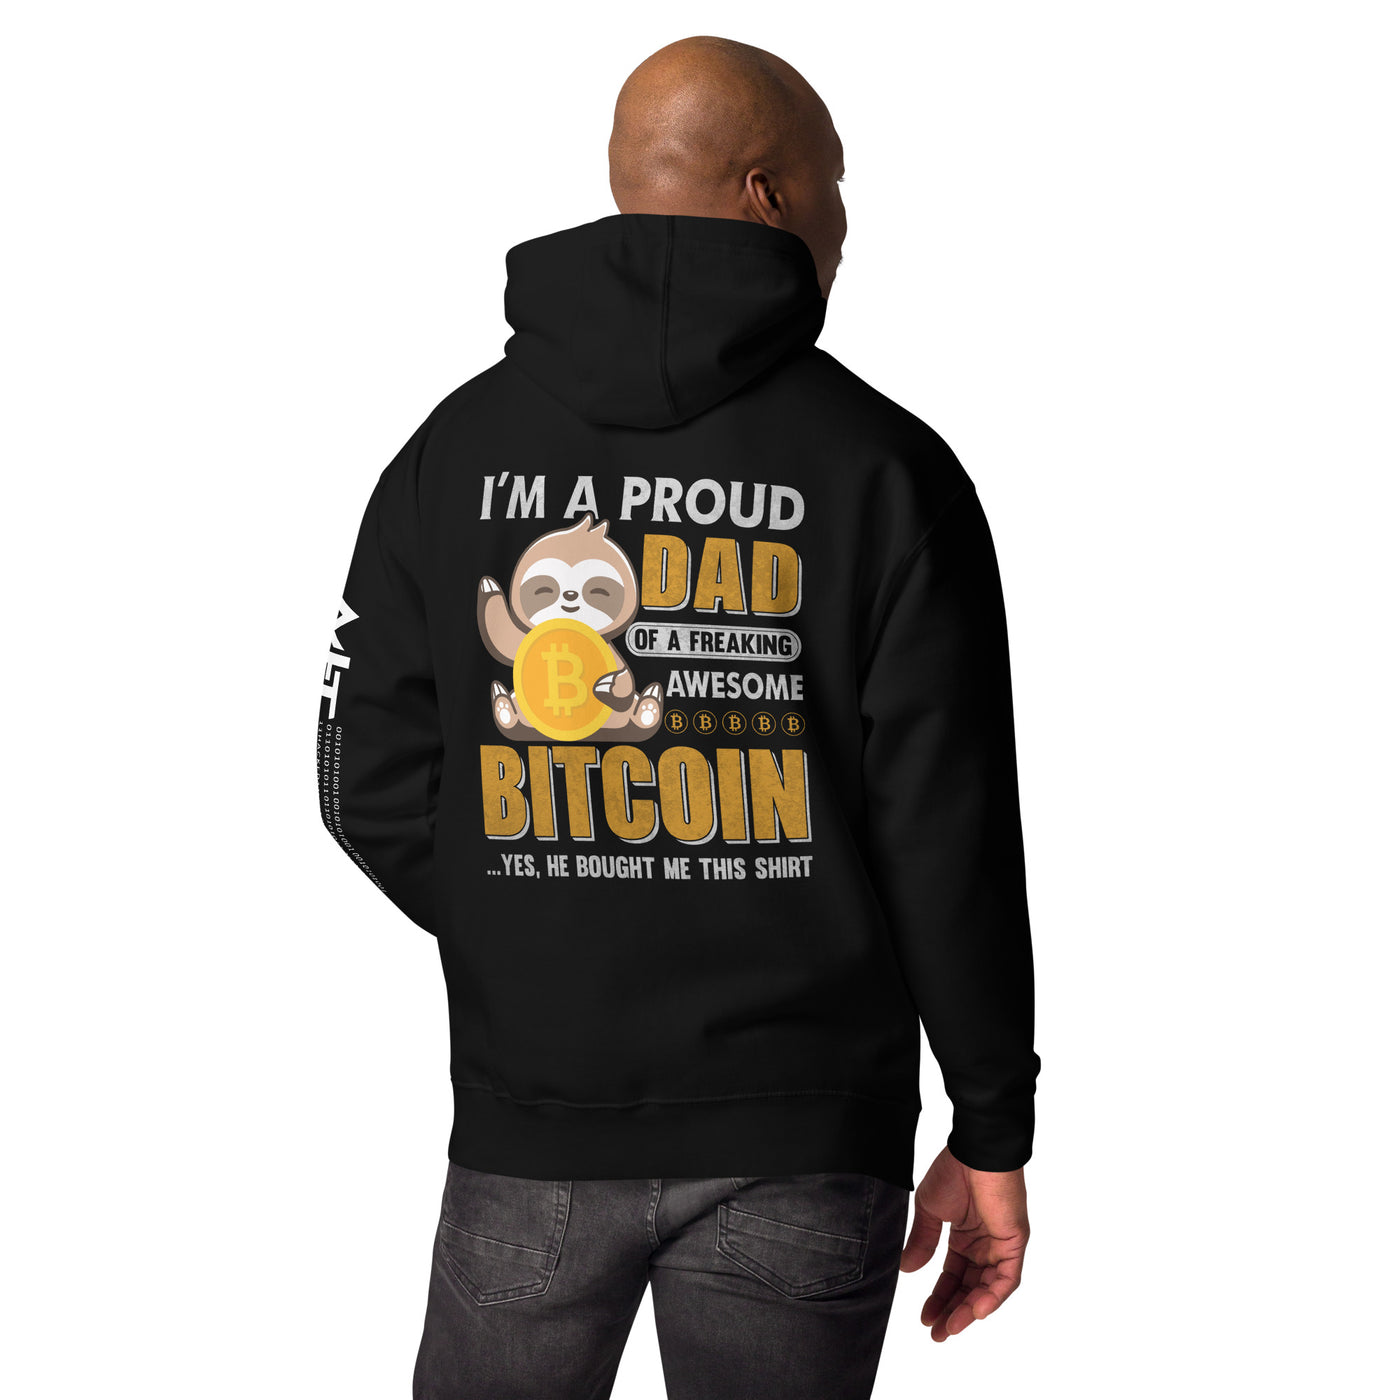 I am a Proud Dad of Bitcoin - Unisex Hoodie  ( Back Print )